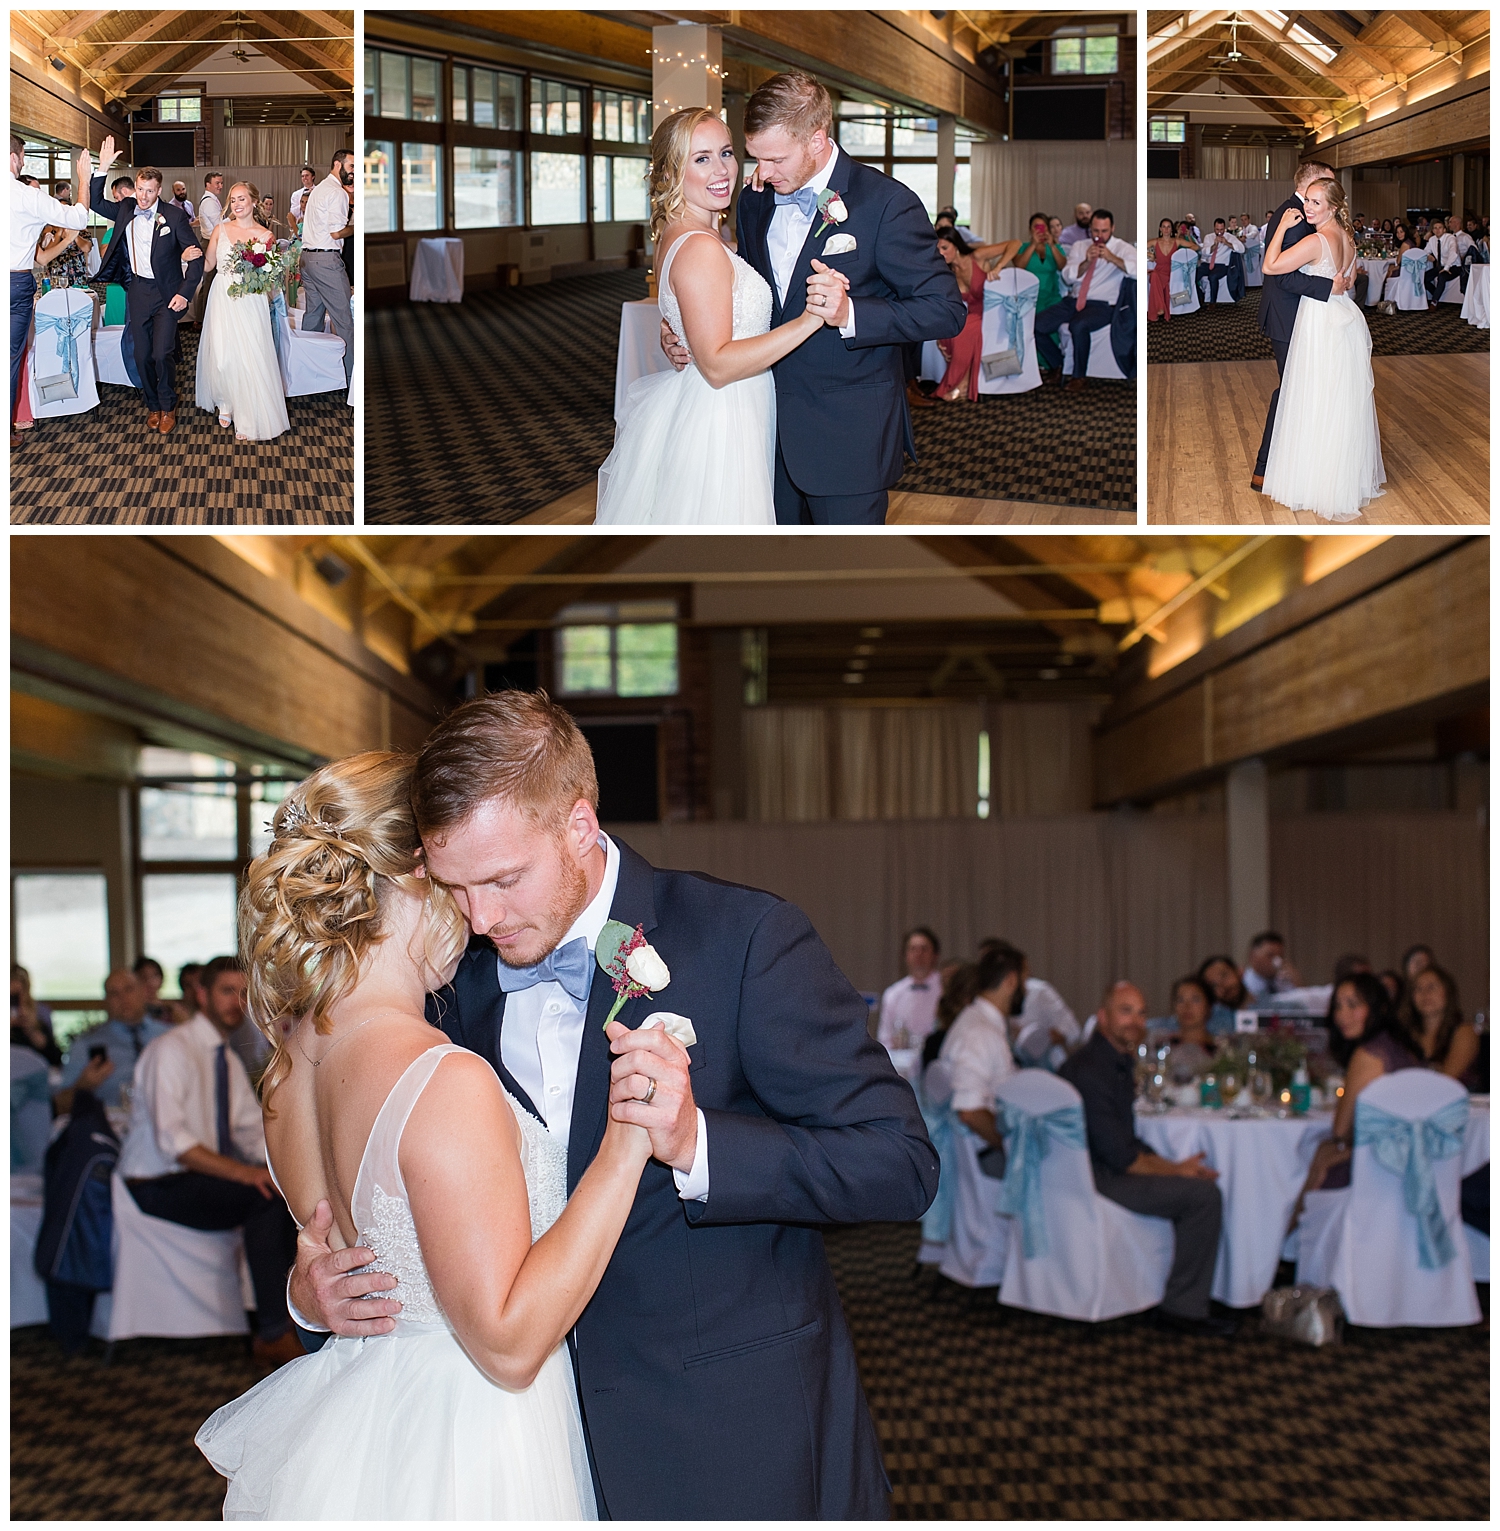 First Dance at Sugarloaf Mountain Resort Wedding in Maine, photos by Halie Olszowy.